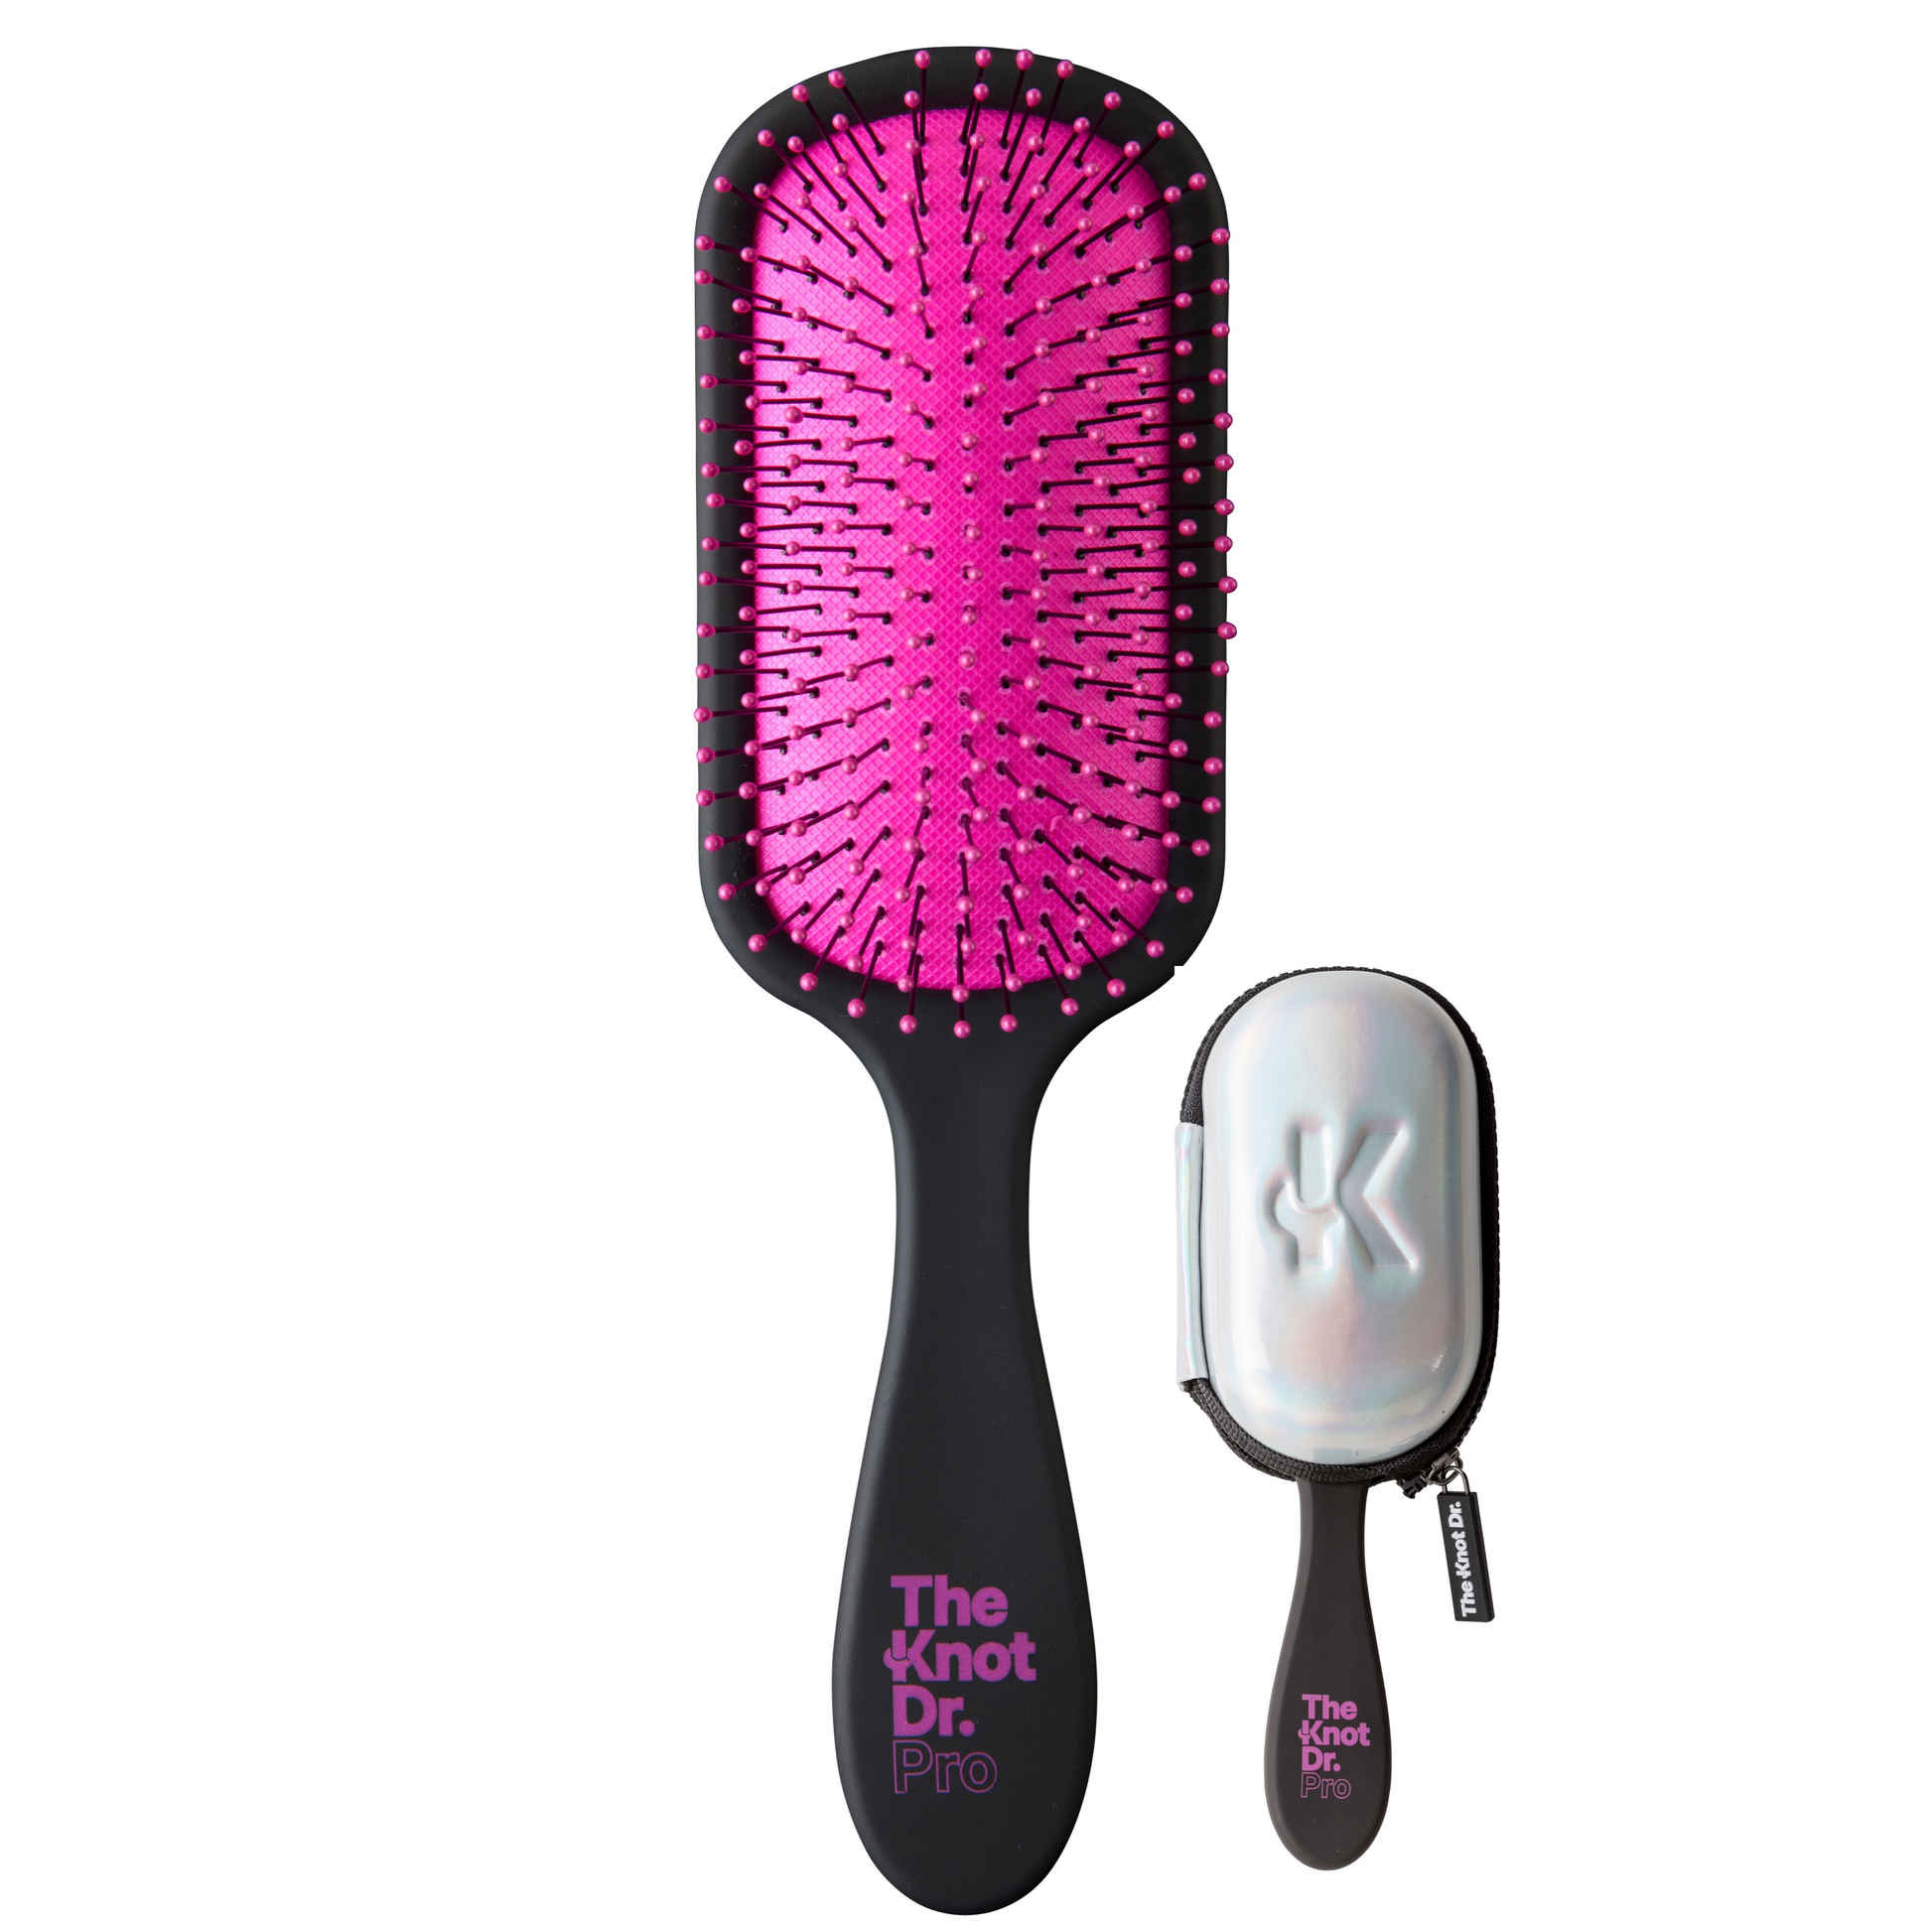 Black detangling brush with pink pad and holographic protector head case